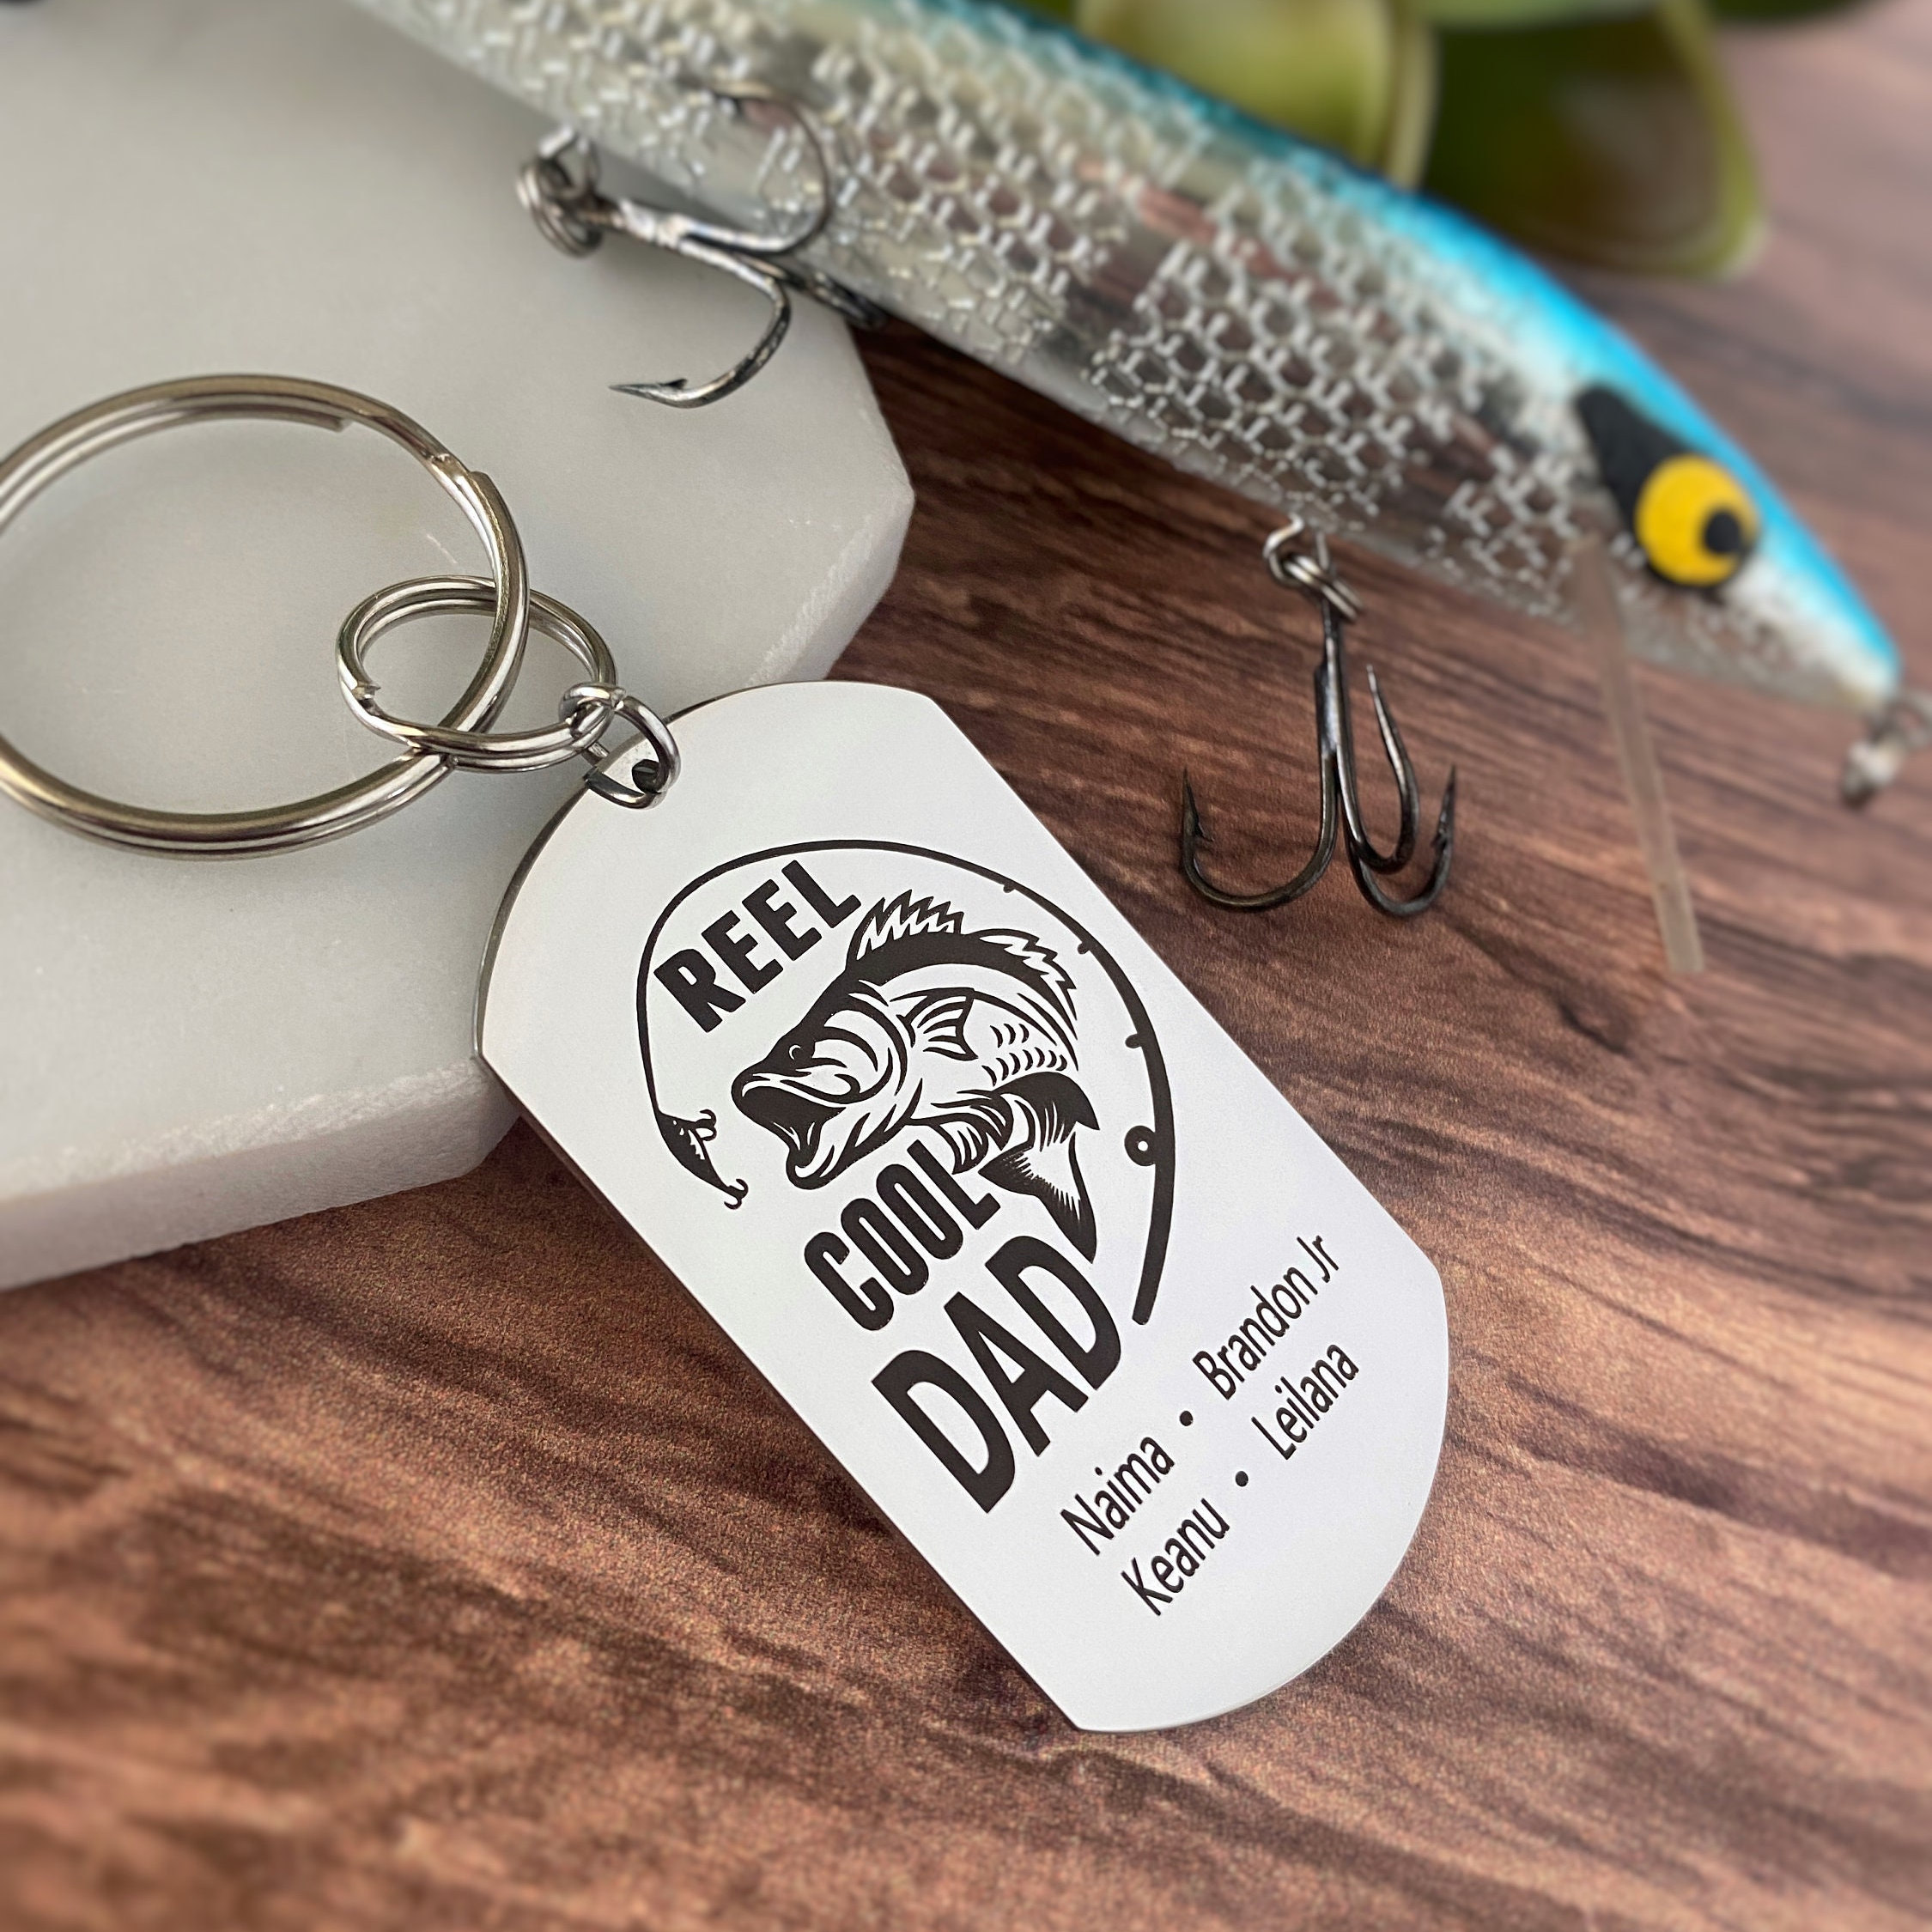 Engraved reel Cool Fishing Keychain Birthday Gift to Dad, Grandpa, or Papa,  Gift From Kids, 